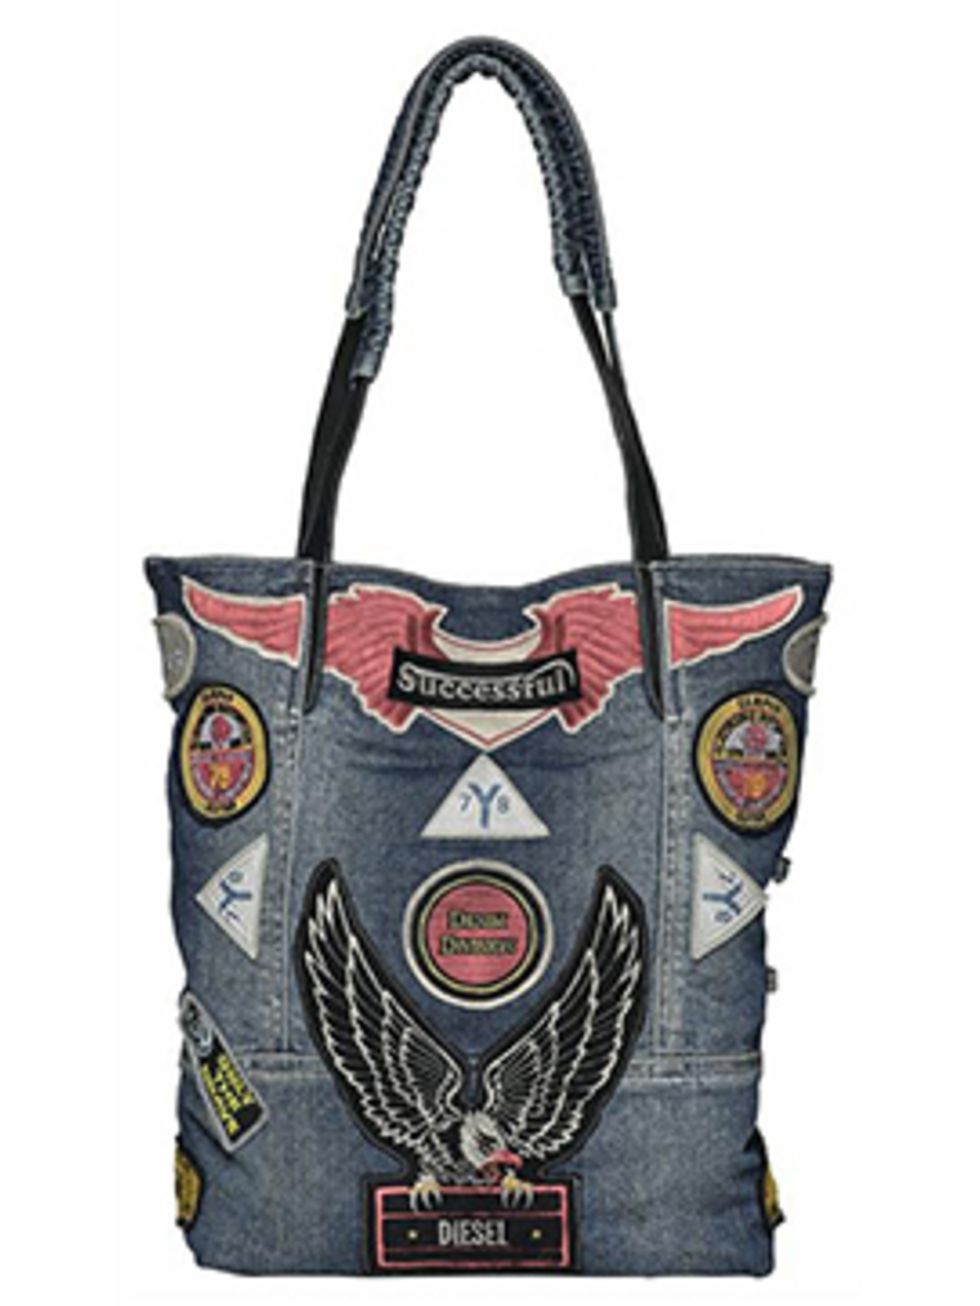 <p>#DieselTribute collection bag</p>